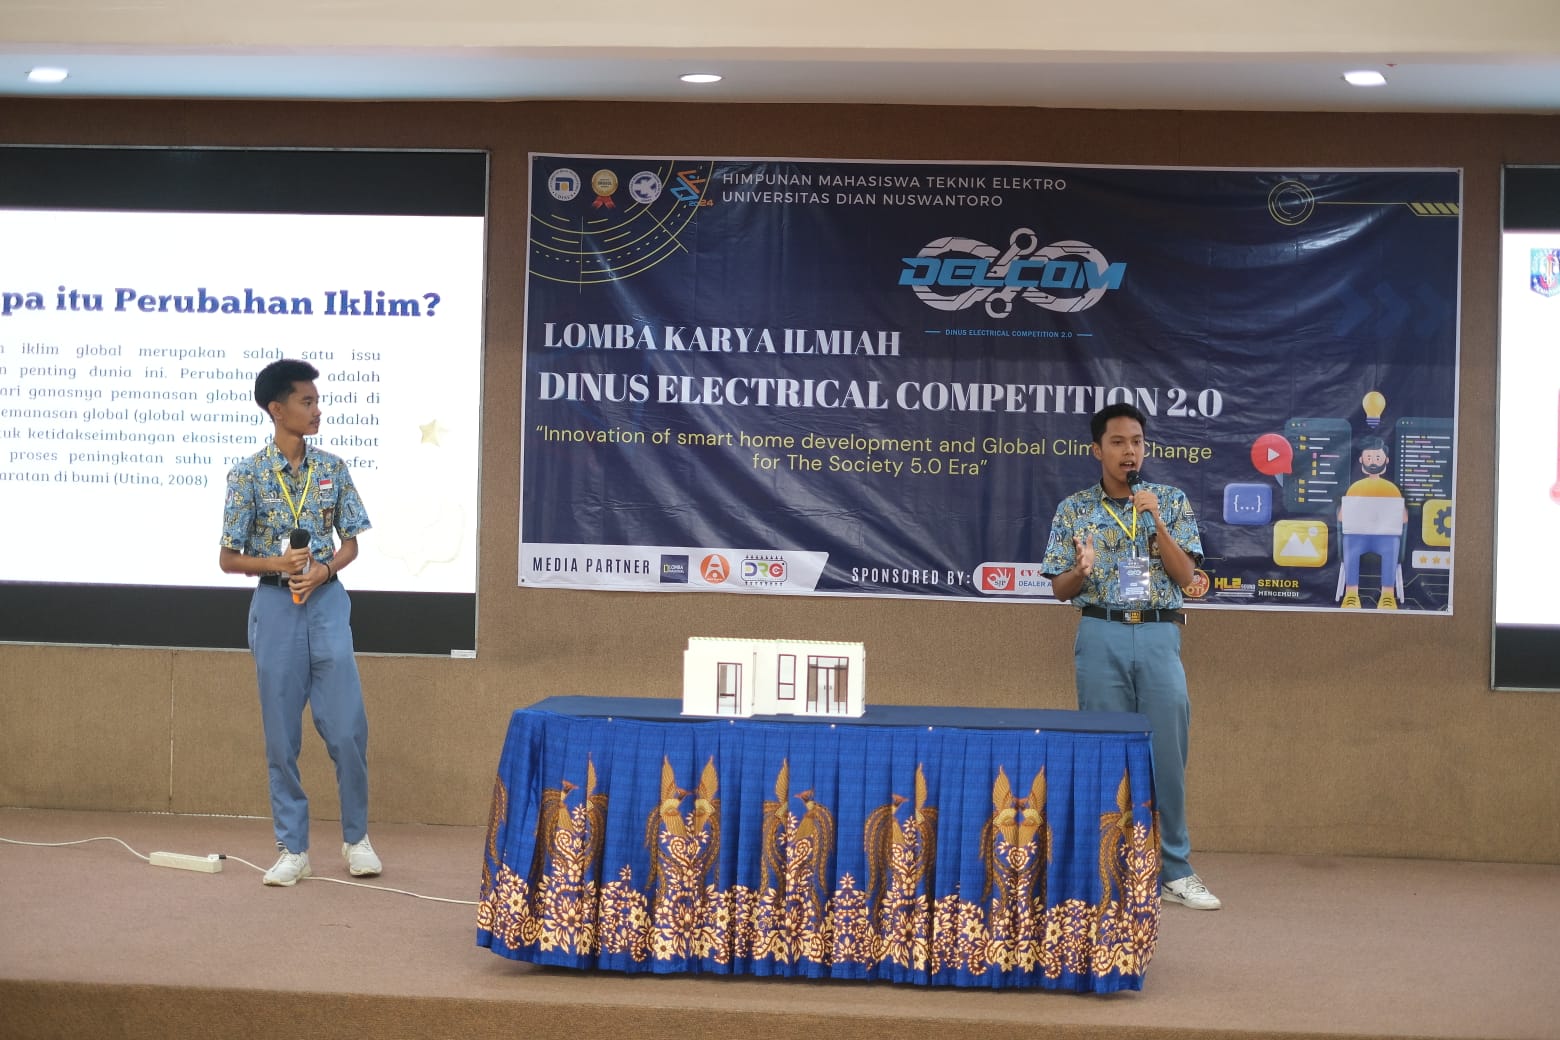 Dinus Electrical Competition